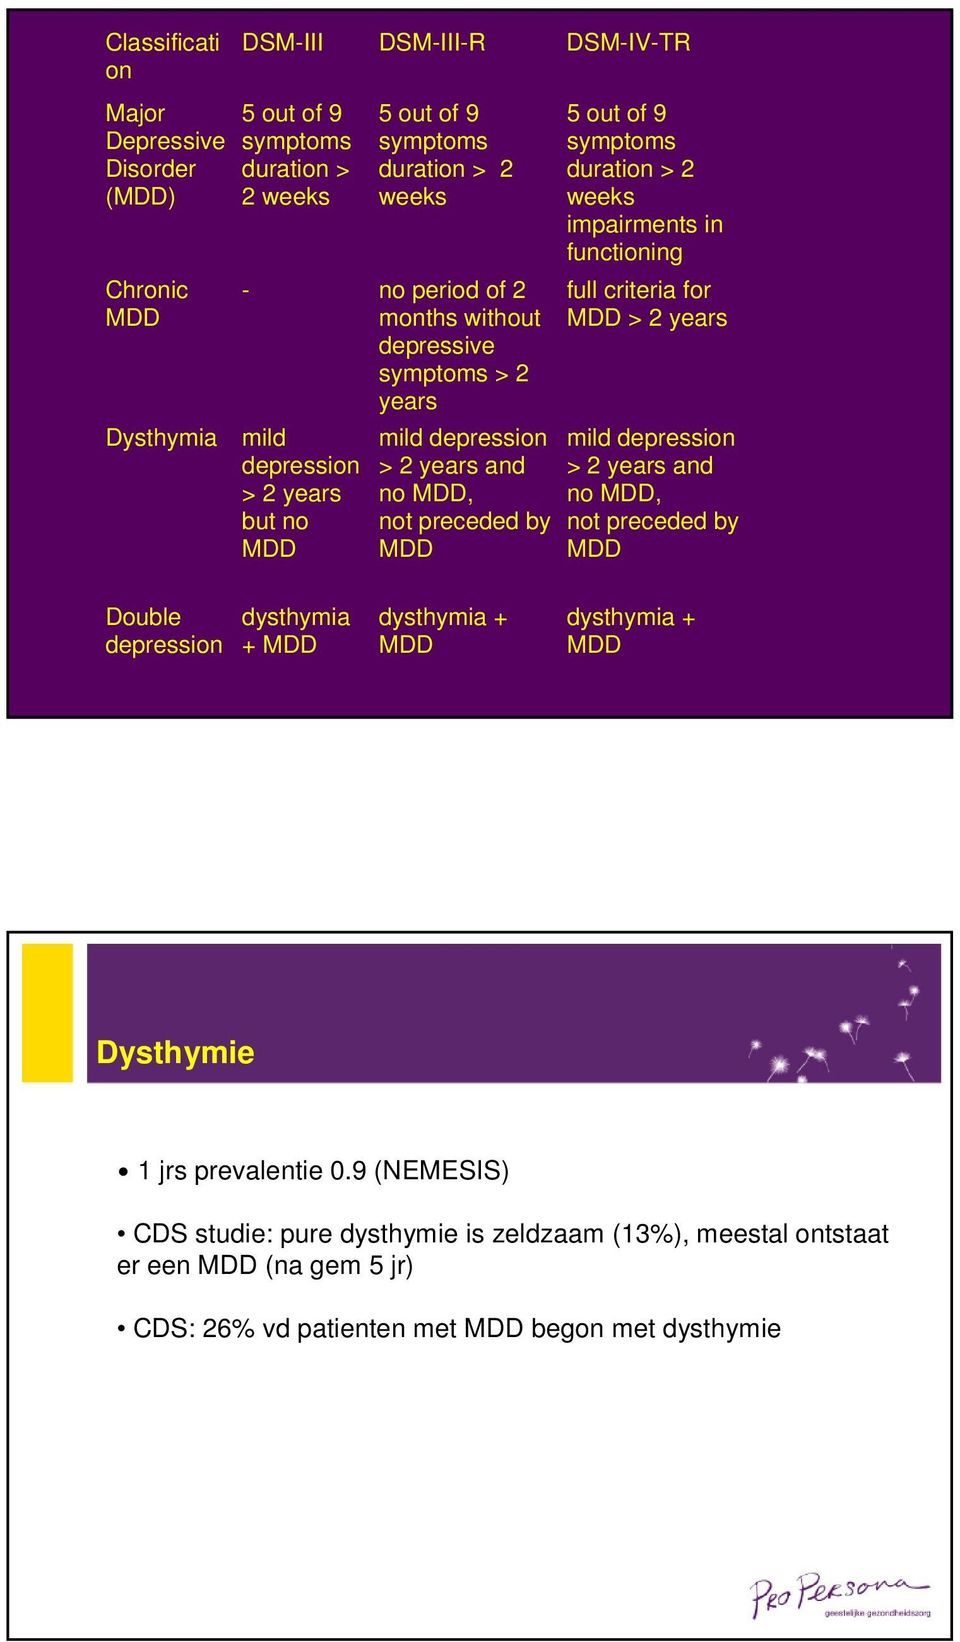 weeks impairments in functioning full criteria for MDD > 2 years mild depression > 2 years and no MDD, not preceded by MDD Double depression dysthymia + MDD dysthymia + MDD dysthymia